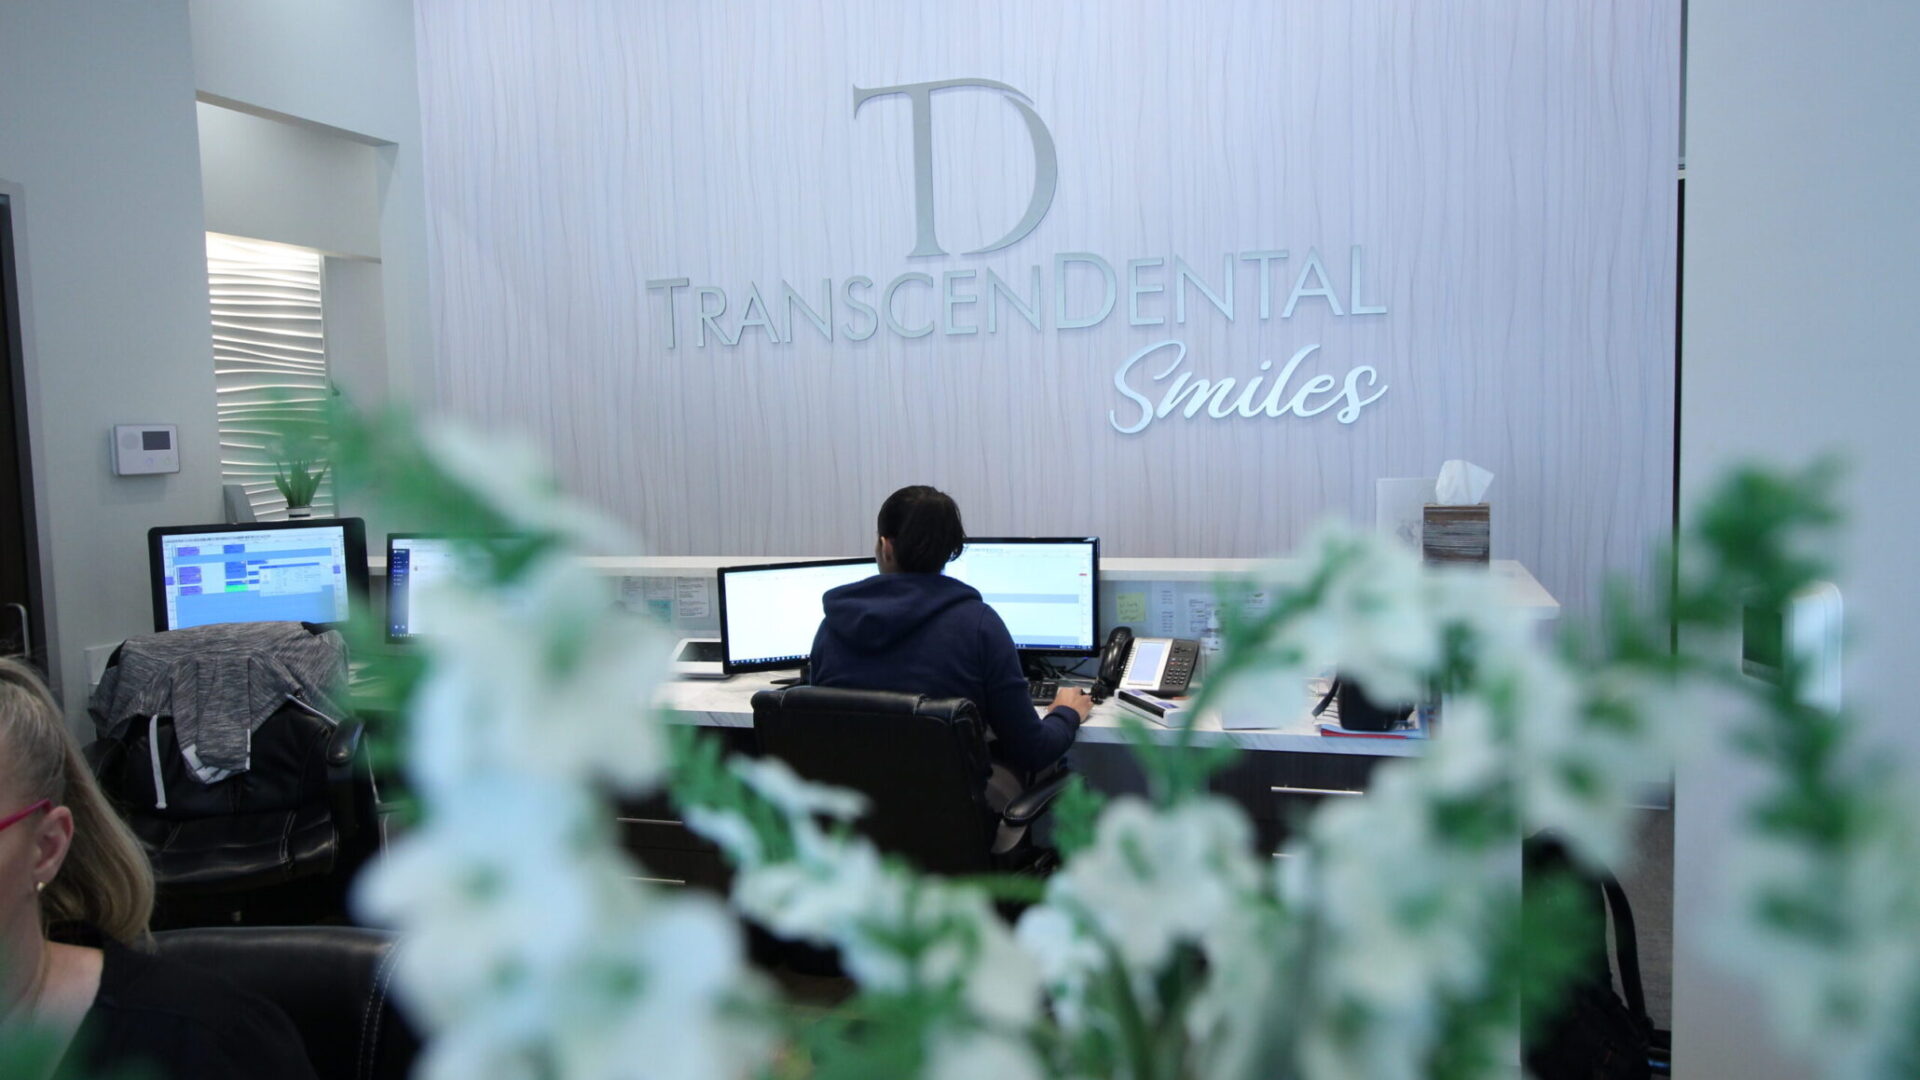 TranscenDental Smiles Located at 13211 Memorial Drive - Trusted Top Rated Houston Texas Dental Practice